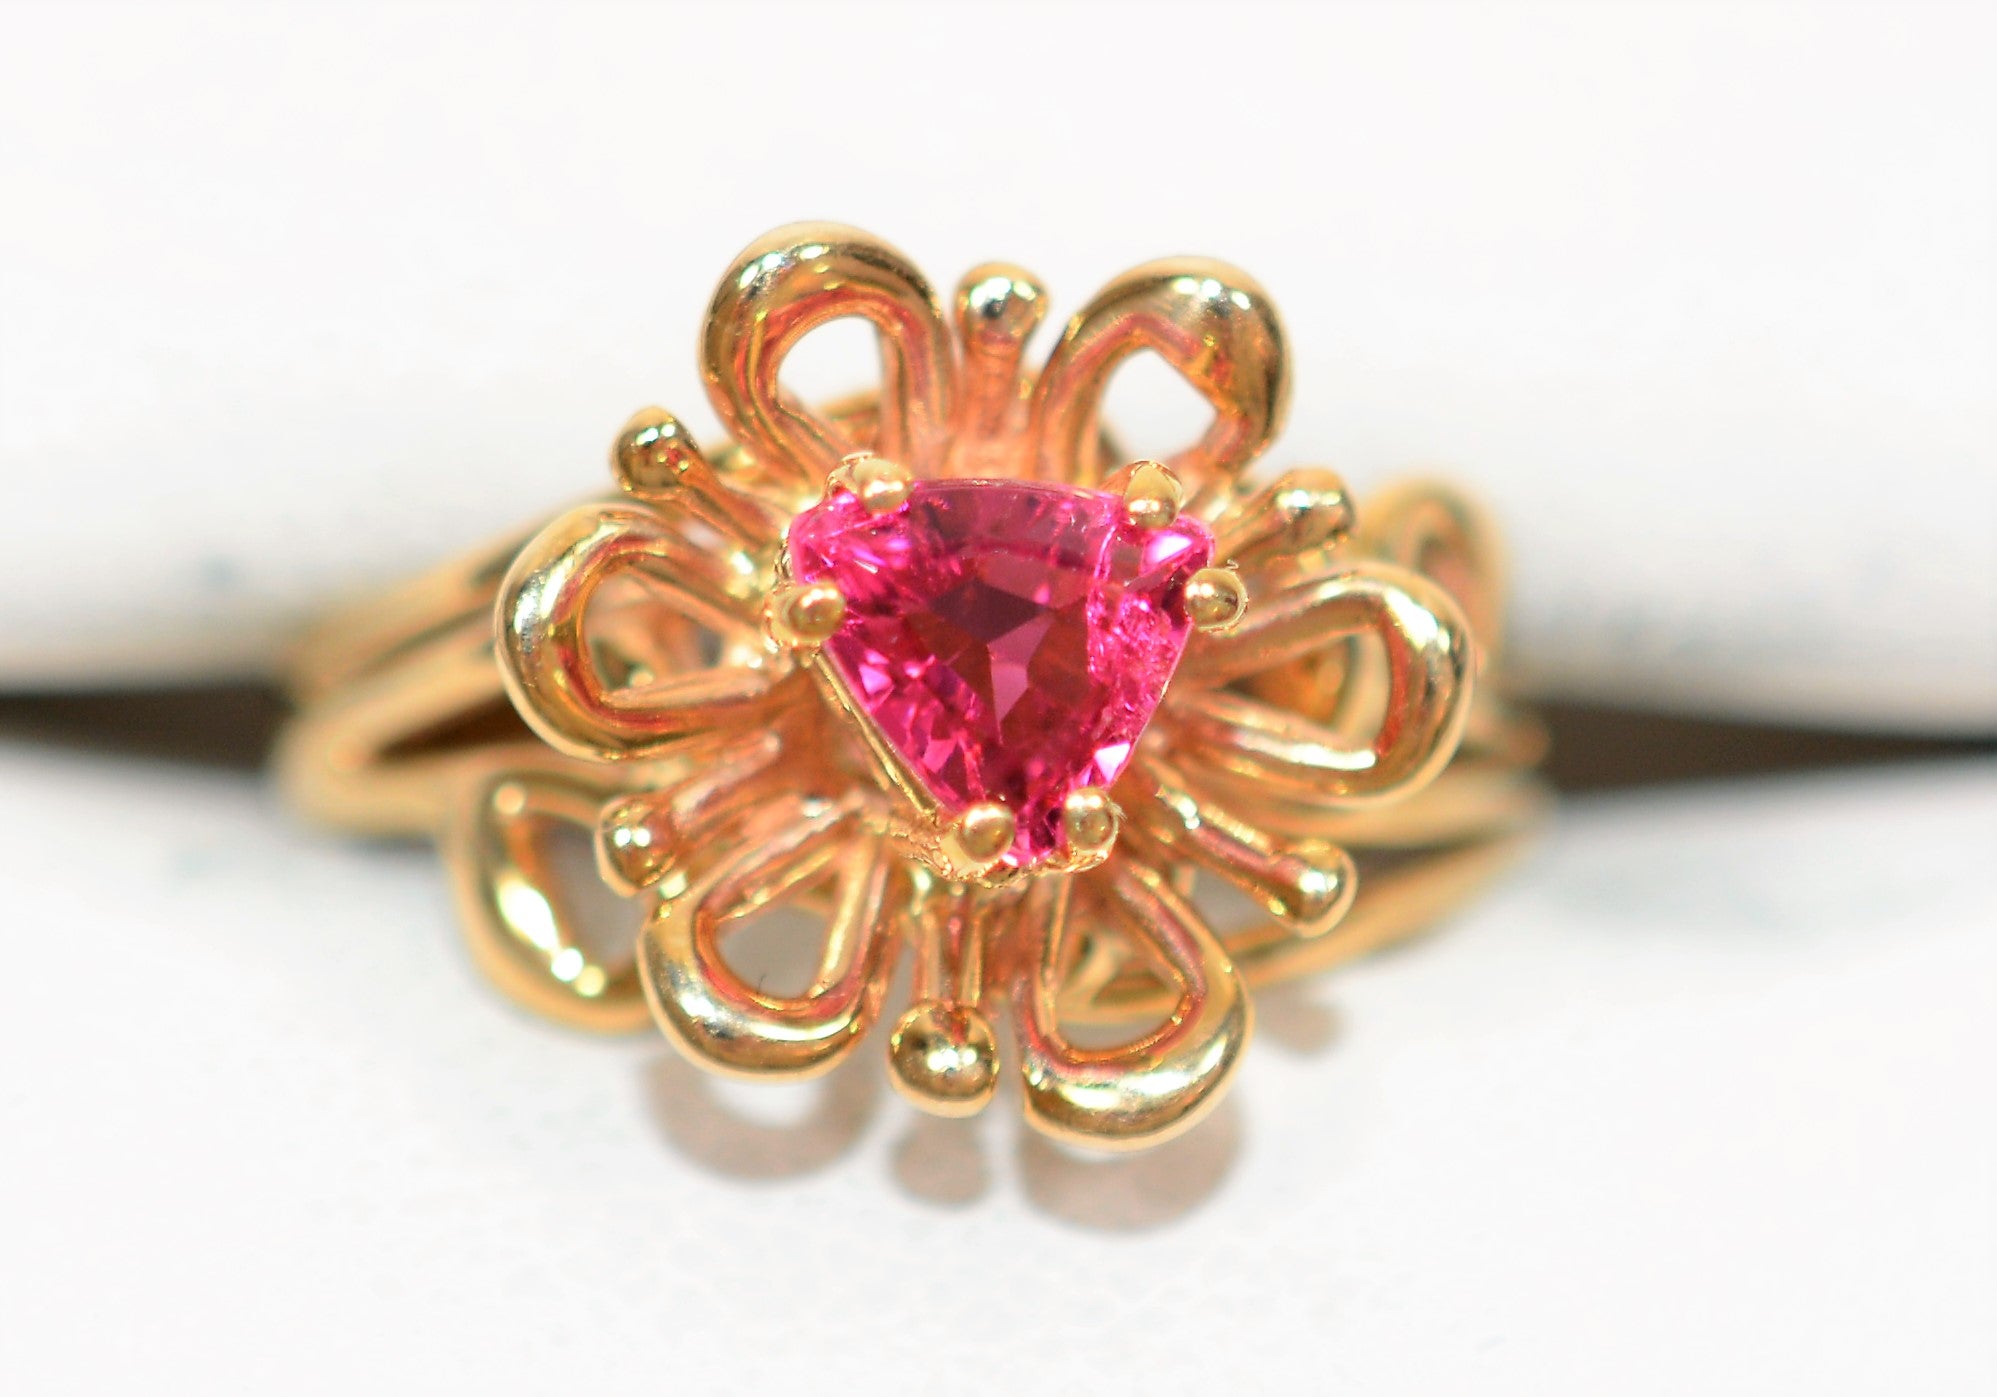 Natural Rubellite Ring 14K Solid Gold .67ct Pink Tourmaline Ring Flower Ring Solitaire Ring Womens Ring Statement Ring Birthstone Ring Jewelry